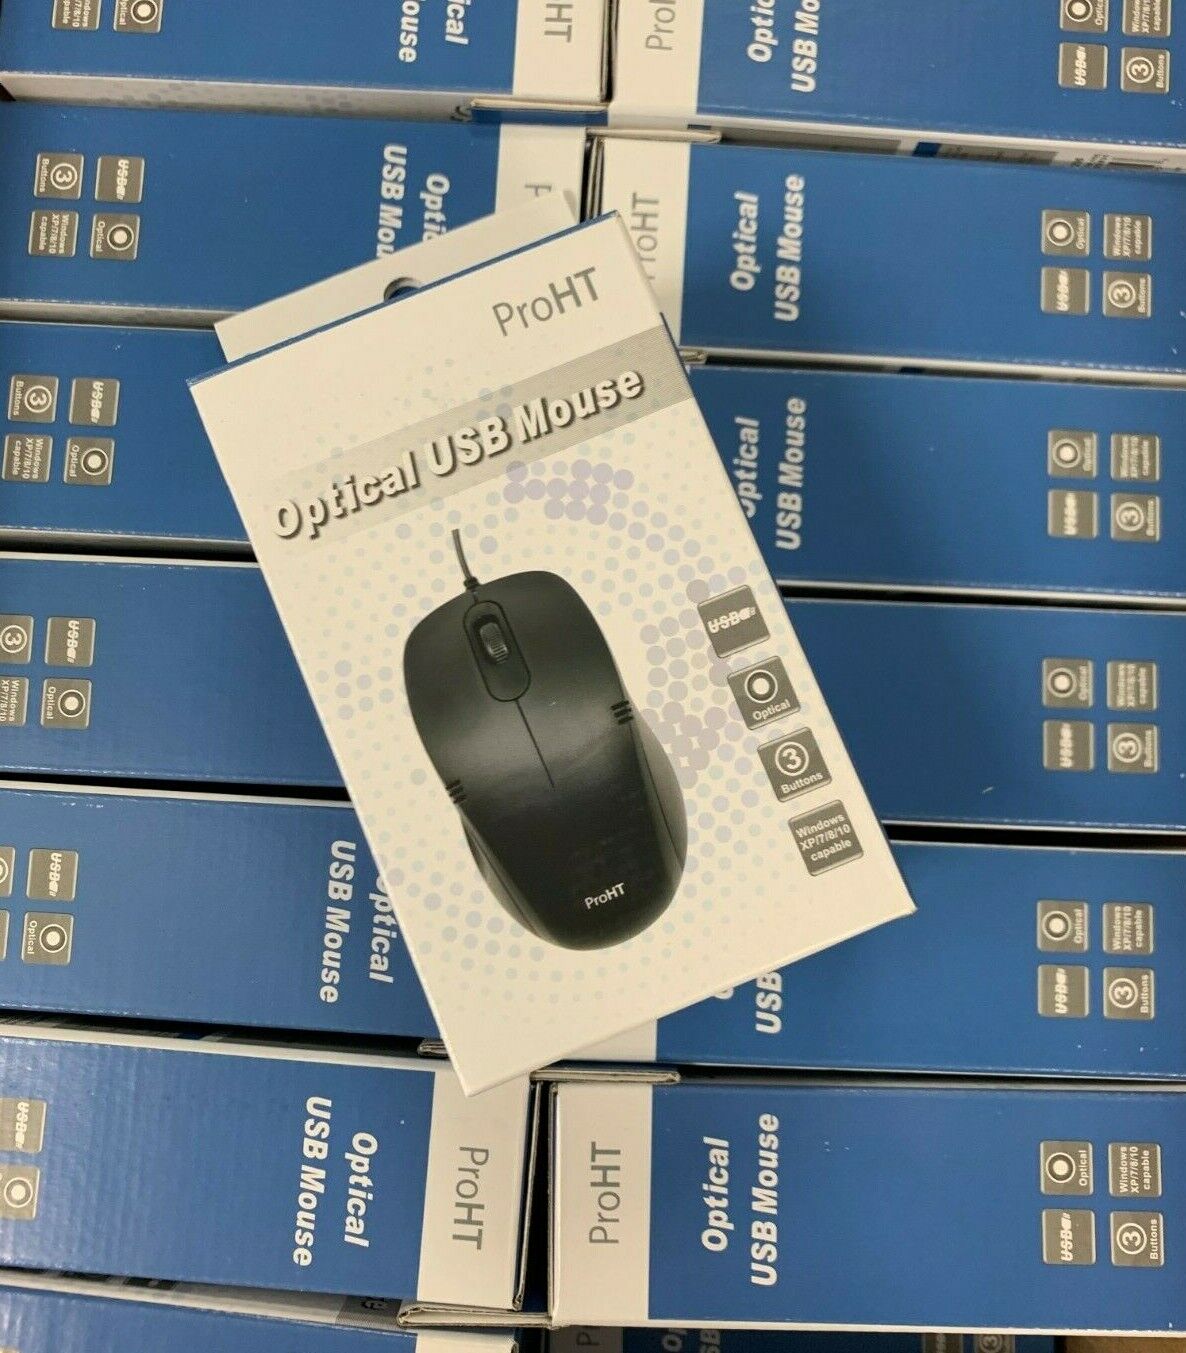 CASE OF 100 ProHT Optical USB Mouse 07235 NEW IN BOX